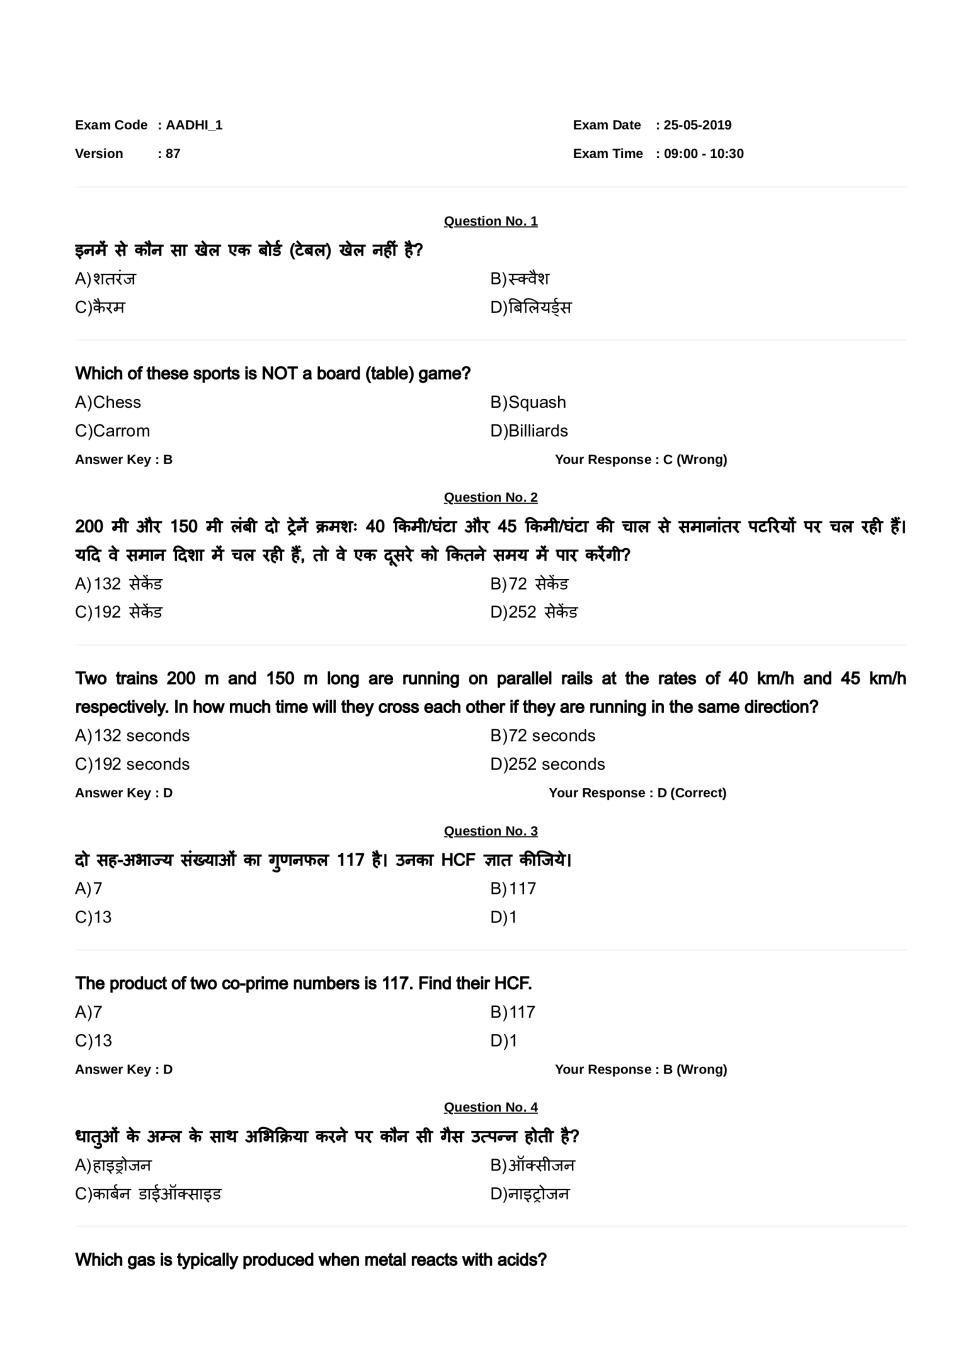 RRB JE Question Paper with Answers for 25 May 2019 Exam Shift 1 - Page 1